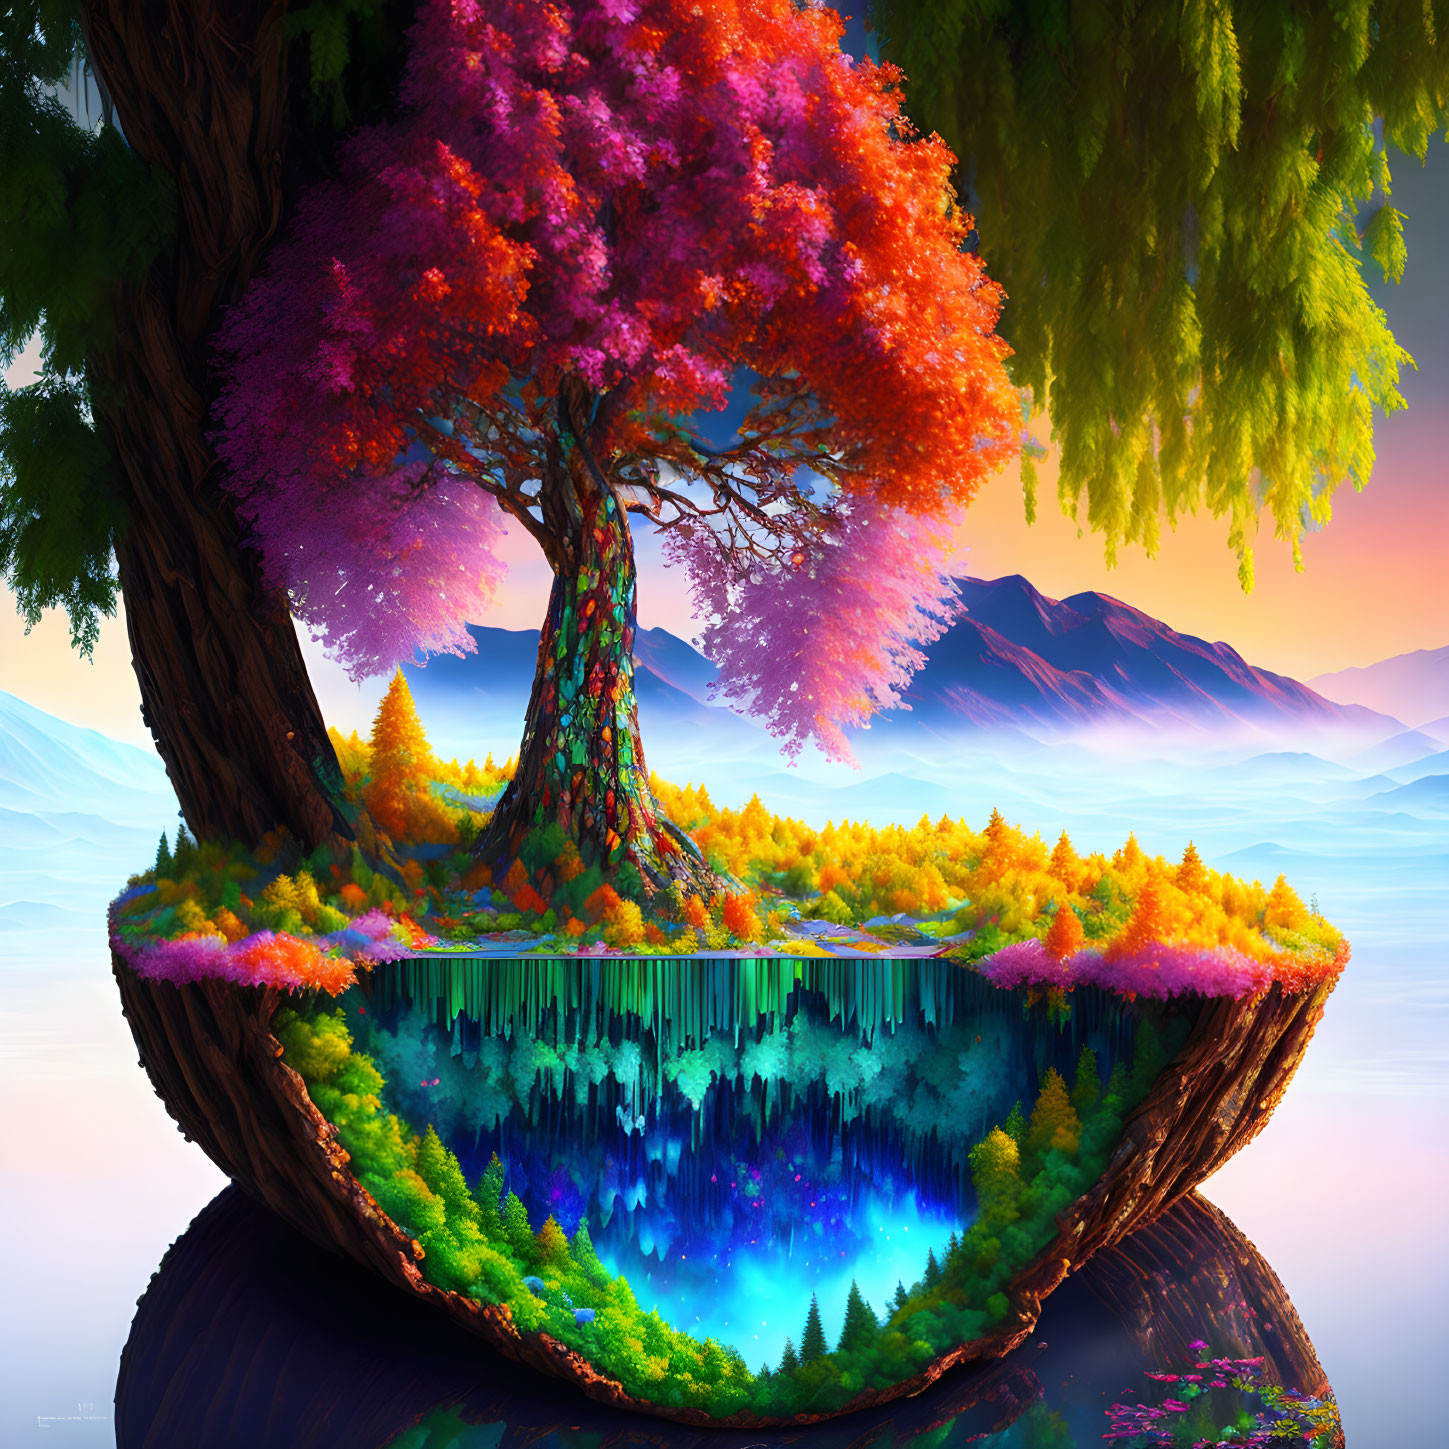 Fantasy landscape with colorful tree roots forming circular island